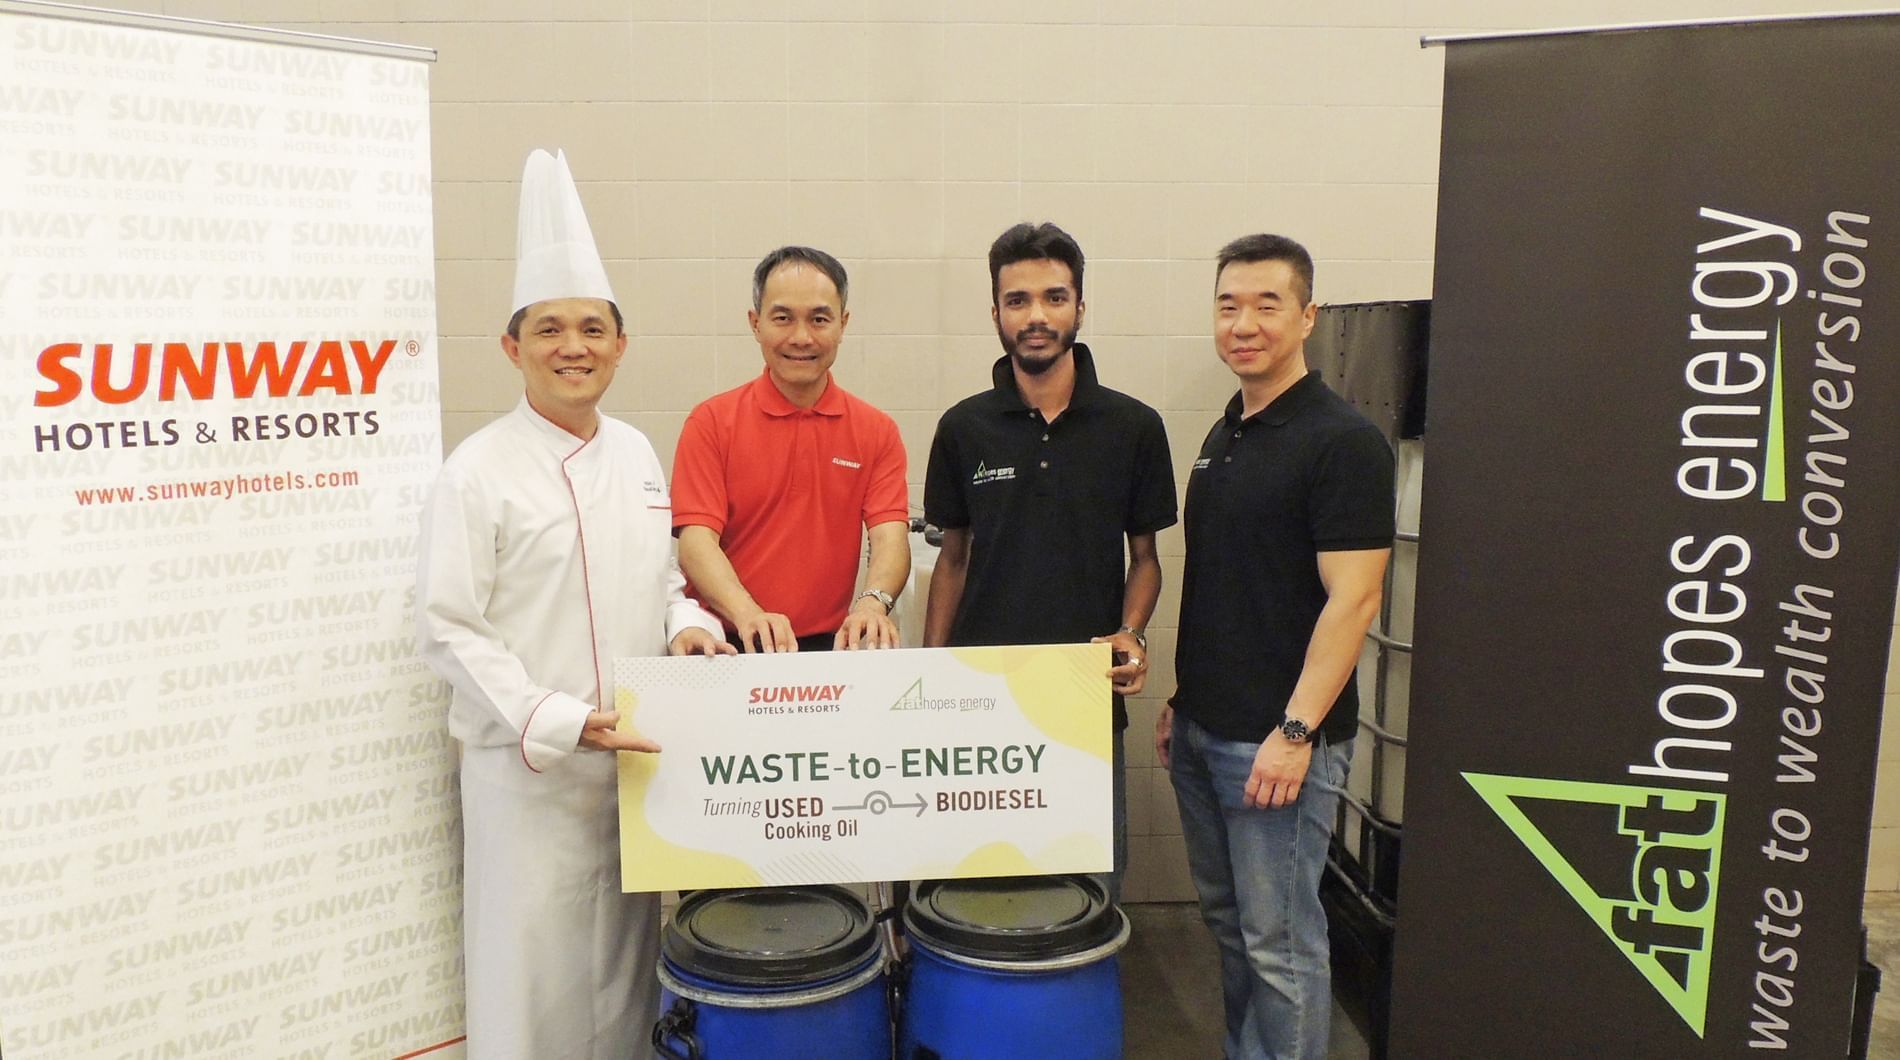 Sunway Group Sustainability campaign at Sunway Hotel Pyramid